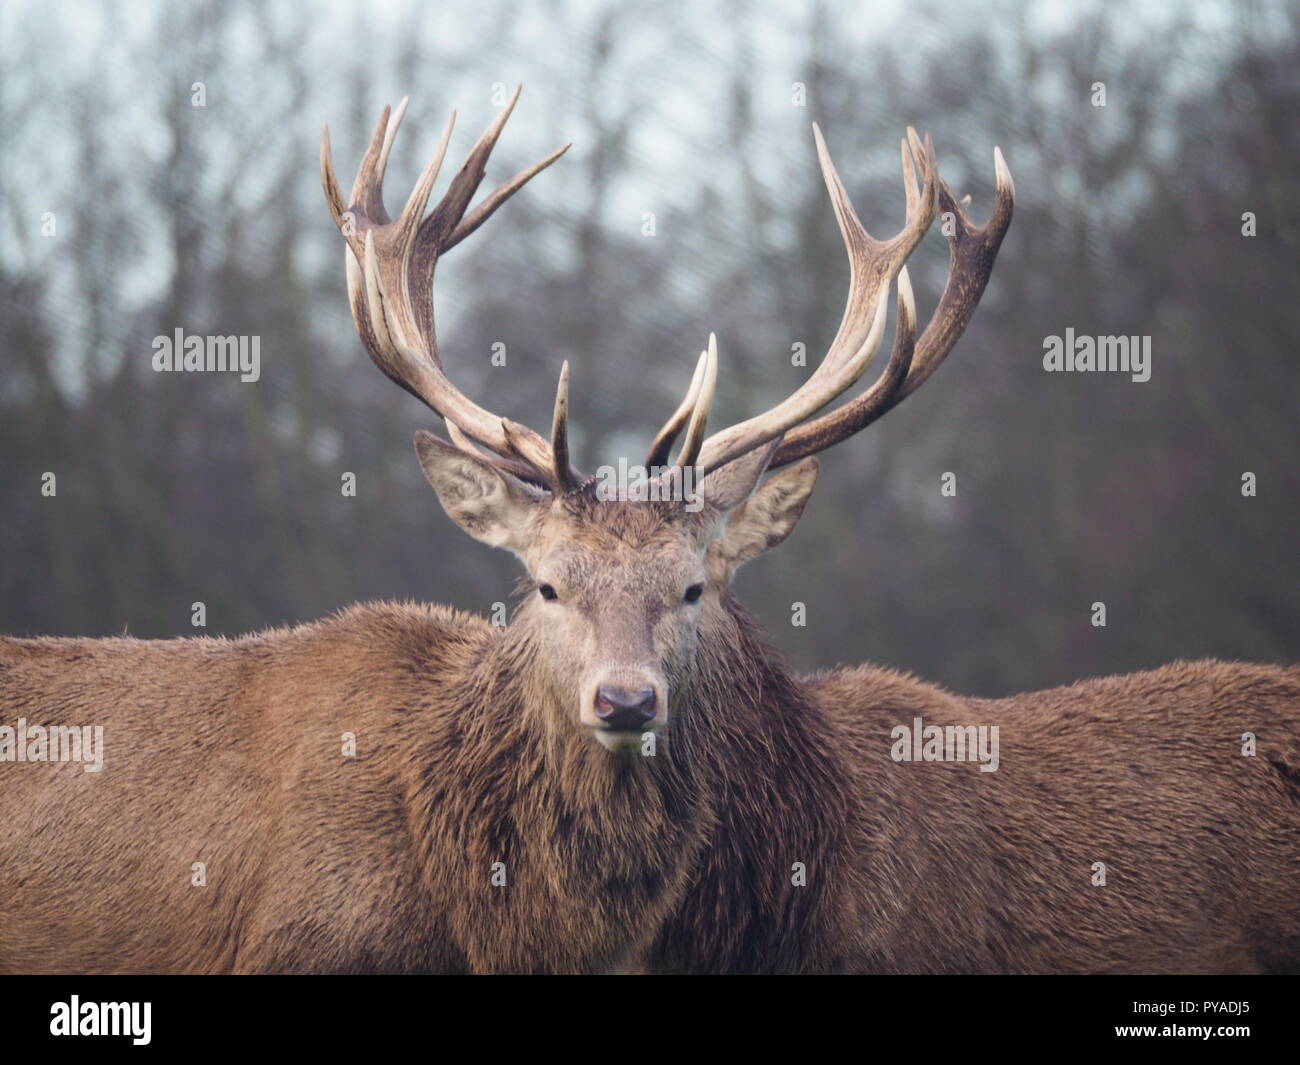 A meeting of minds. Two stags in Bushy Park, England Stock Photo